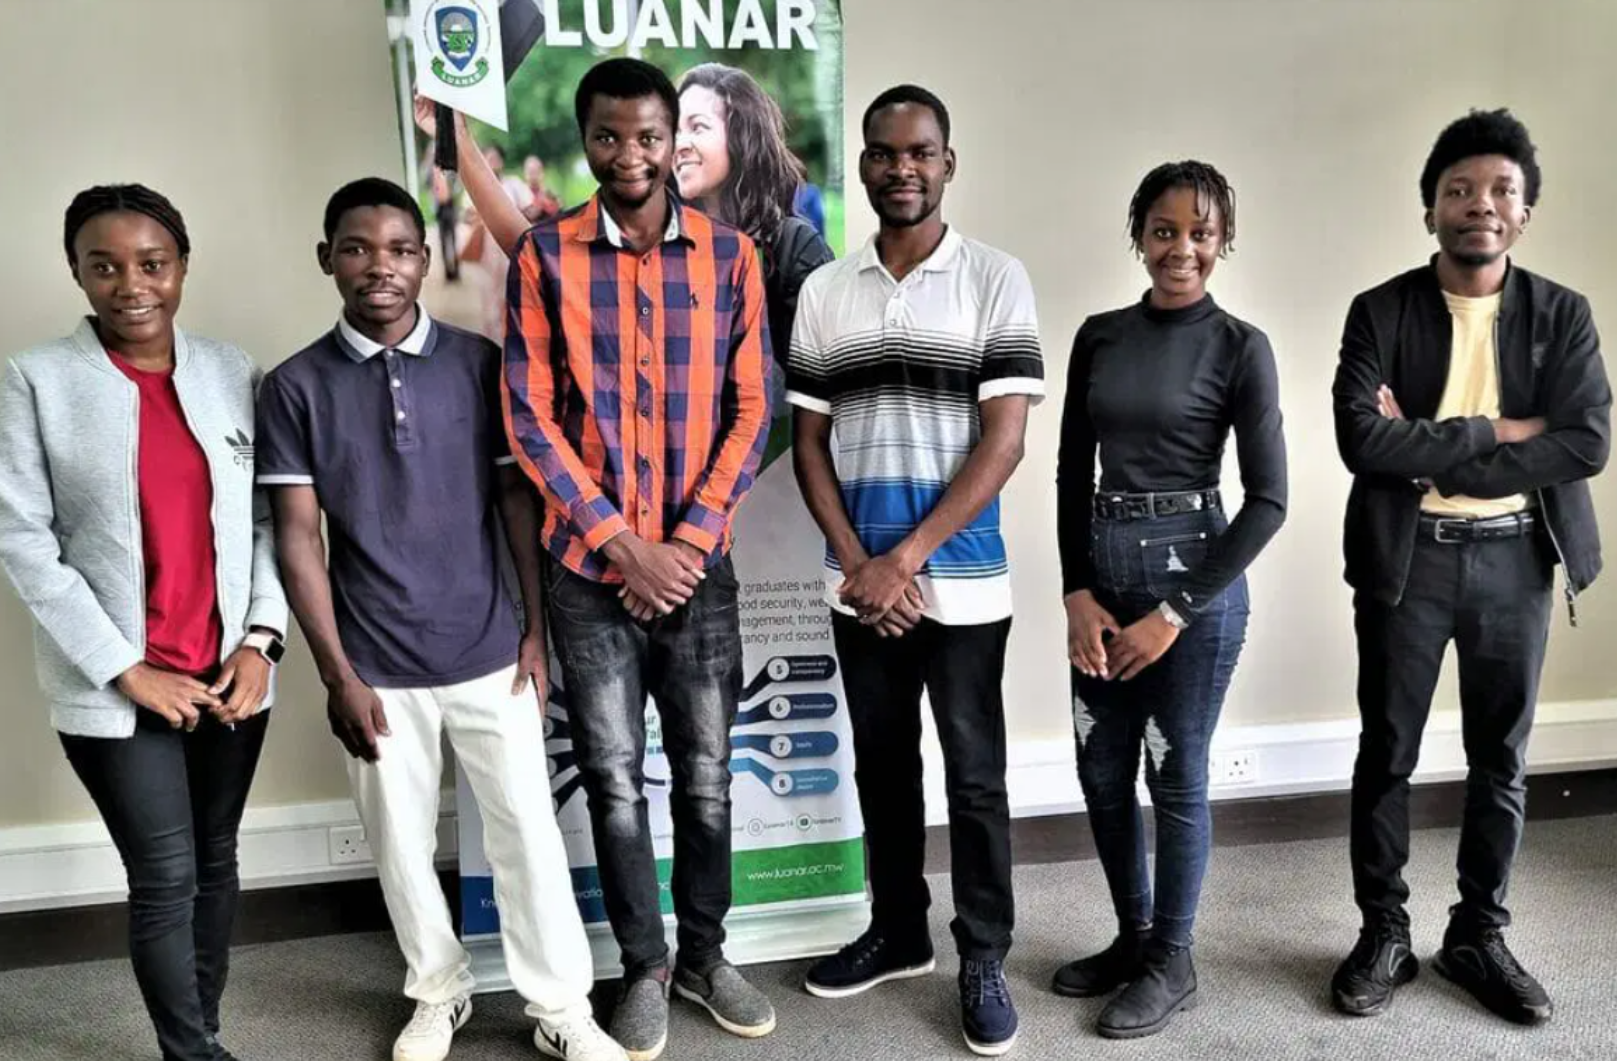 6 students standing in front of a LUANAR sign